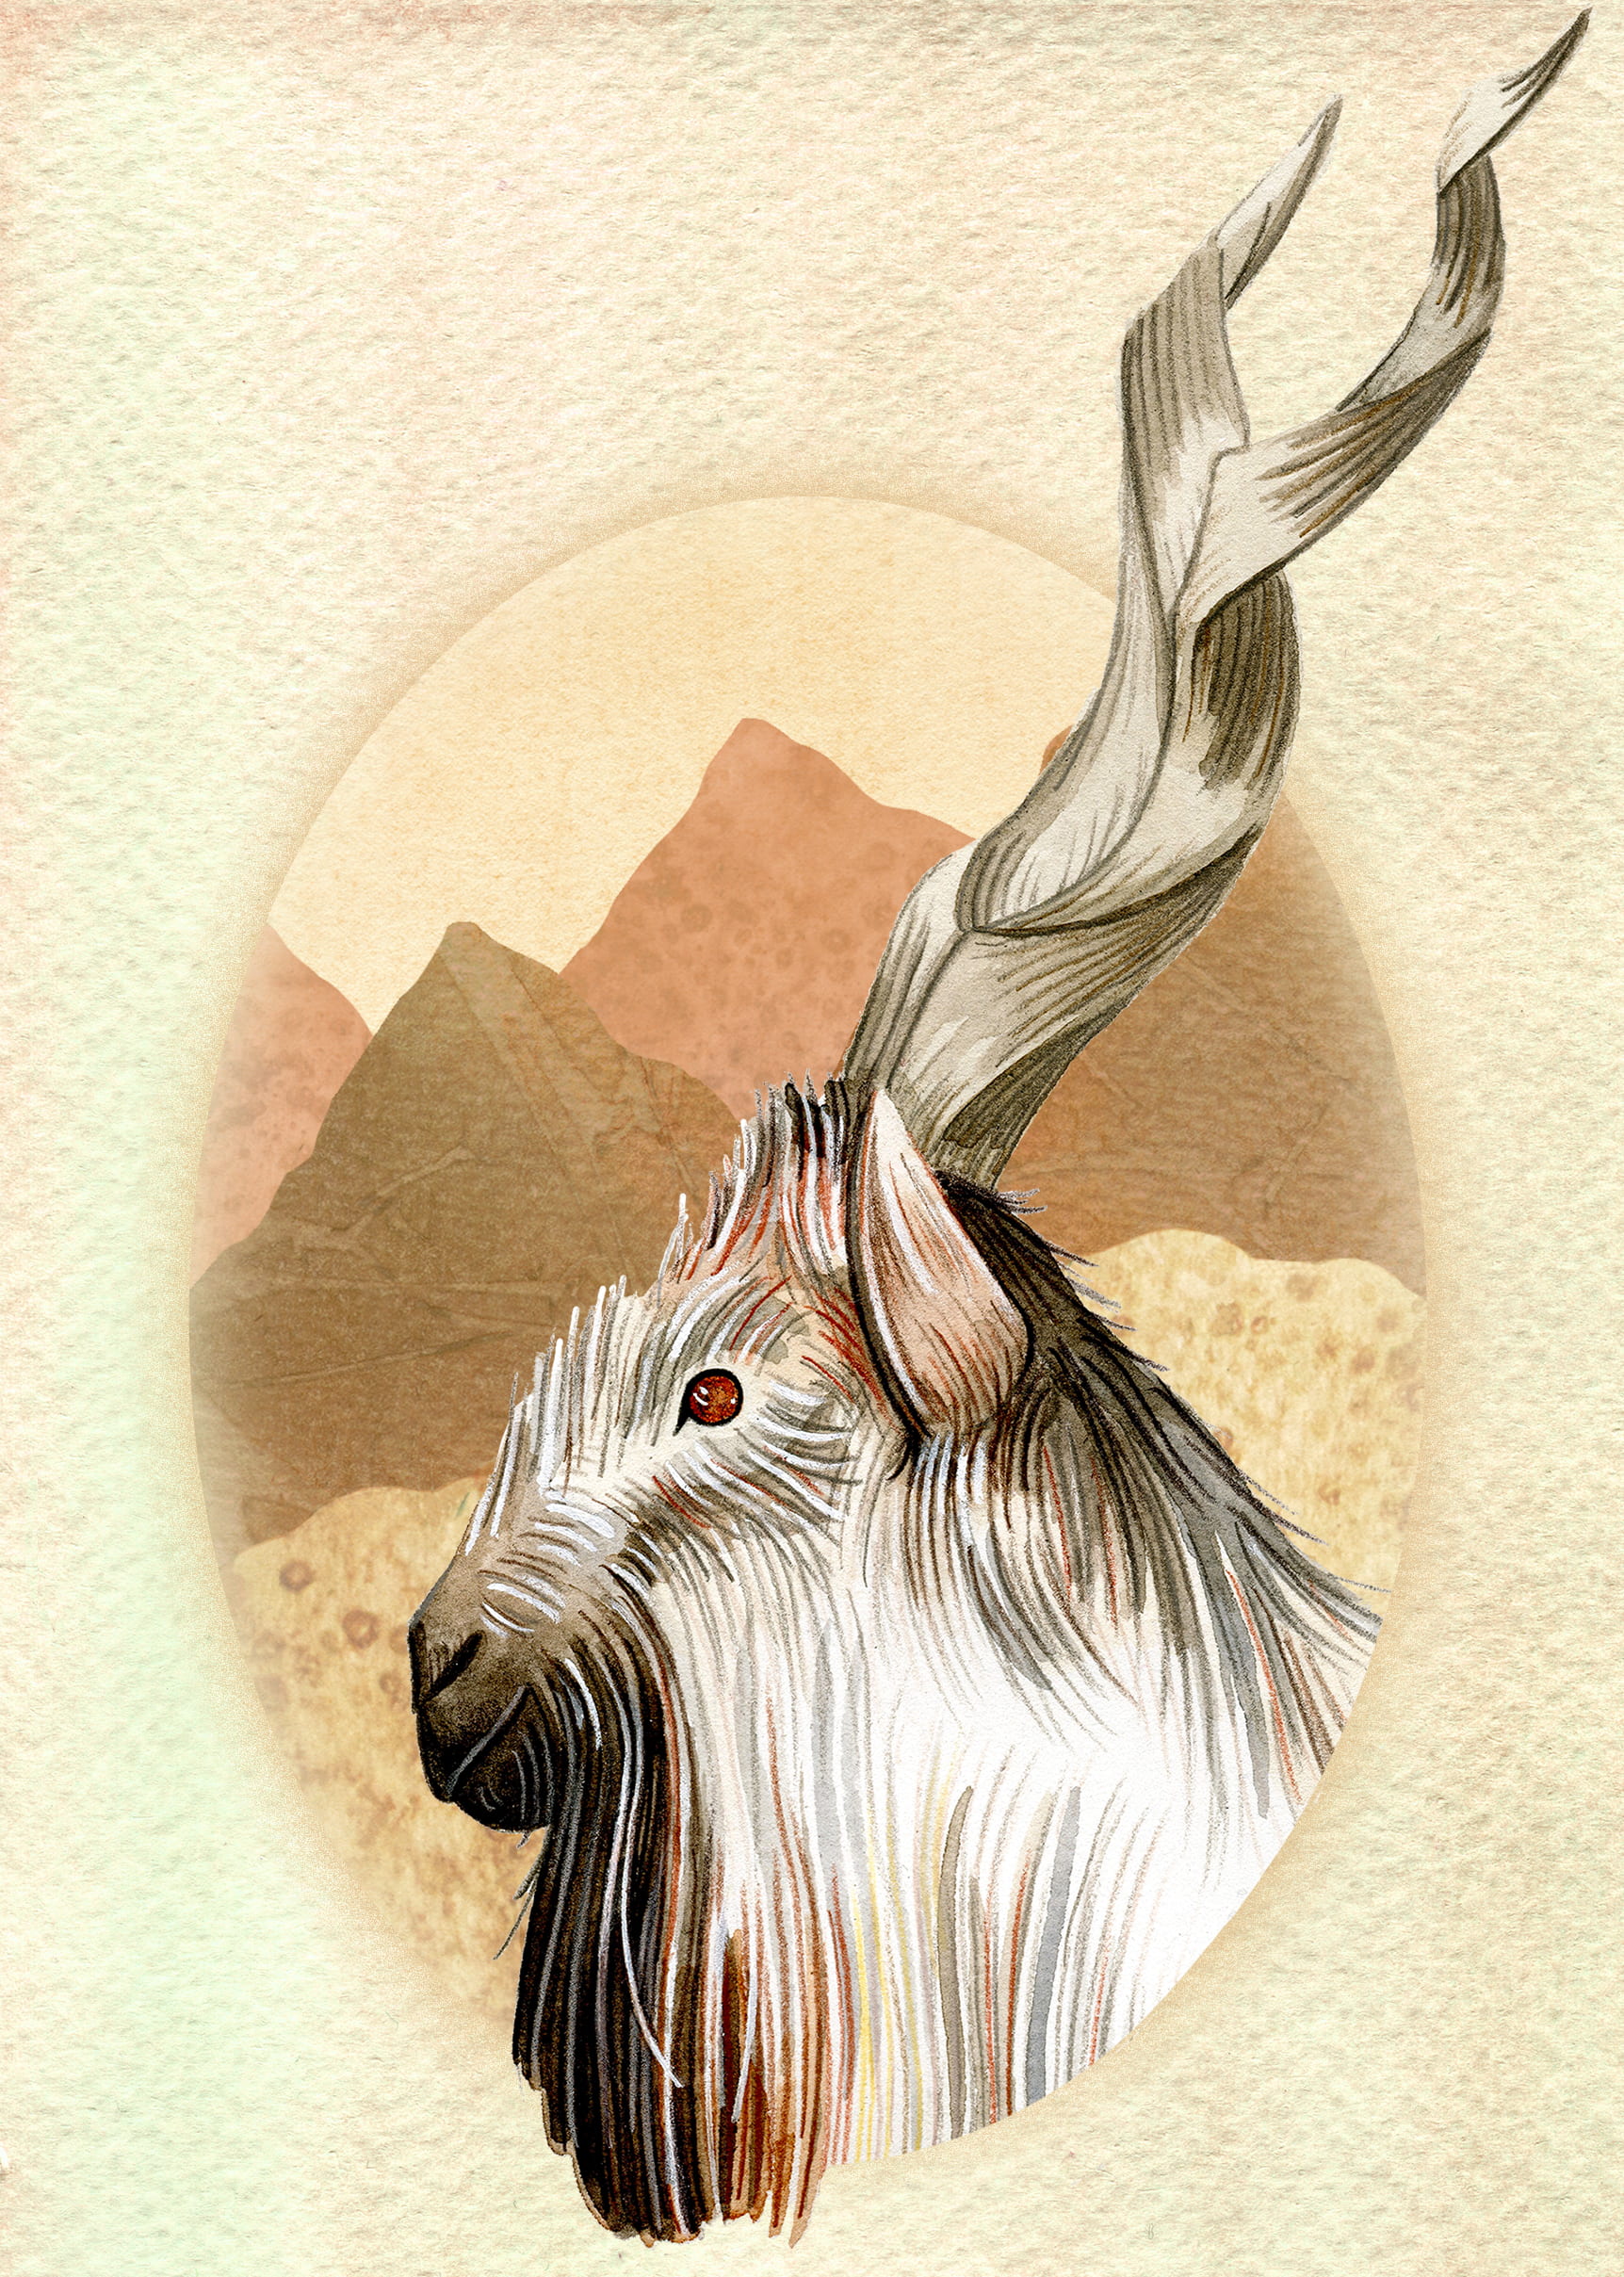 Painting of a Markhor Goat, mountainous terrain shown in the background